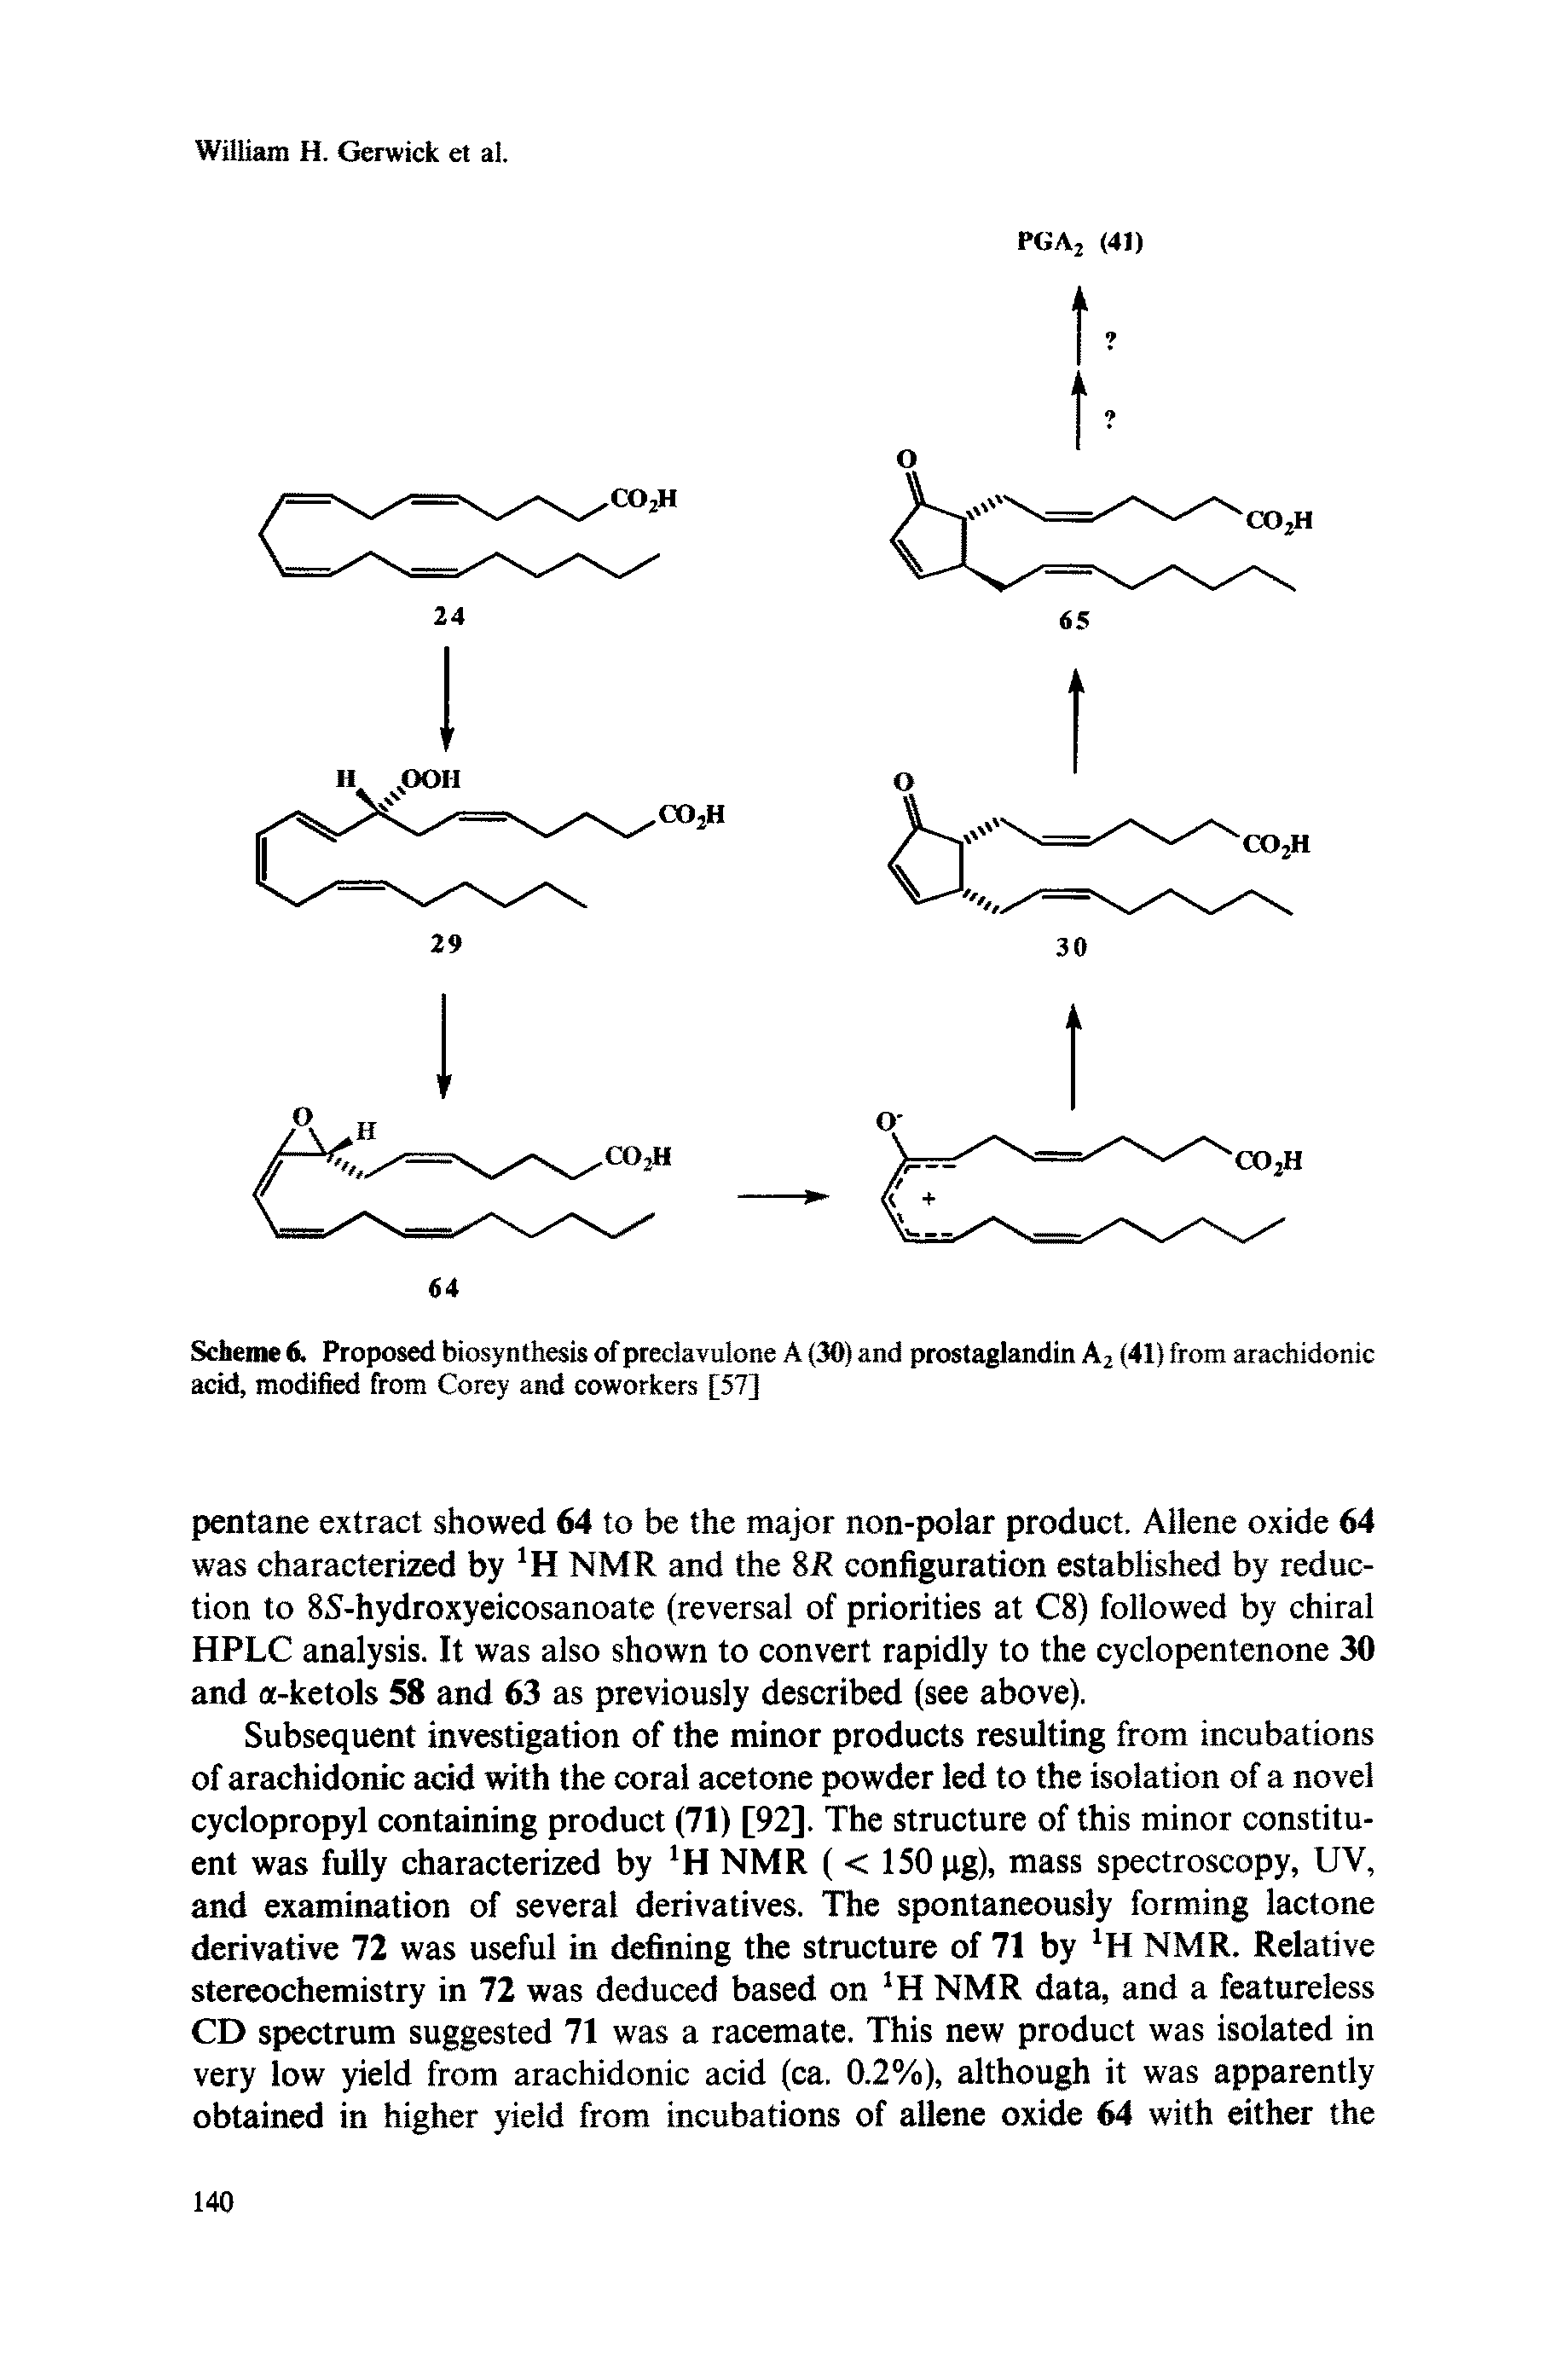 Scheme 6. Proposed biosynthesis of preelavulone A (30) and prostaglandin A2 (41) from arachidonic acid, modified from Corey and coworkers [57]...